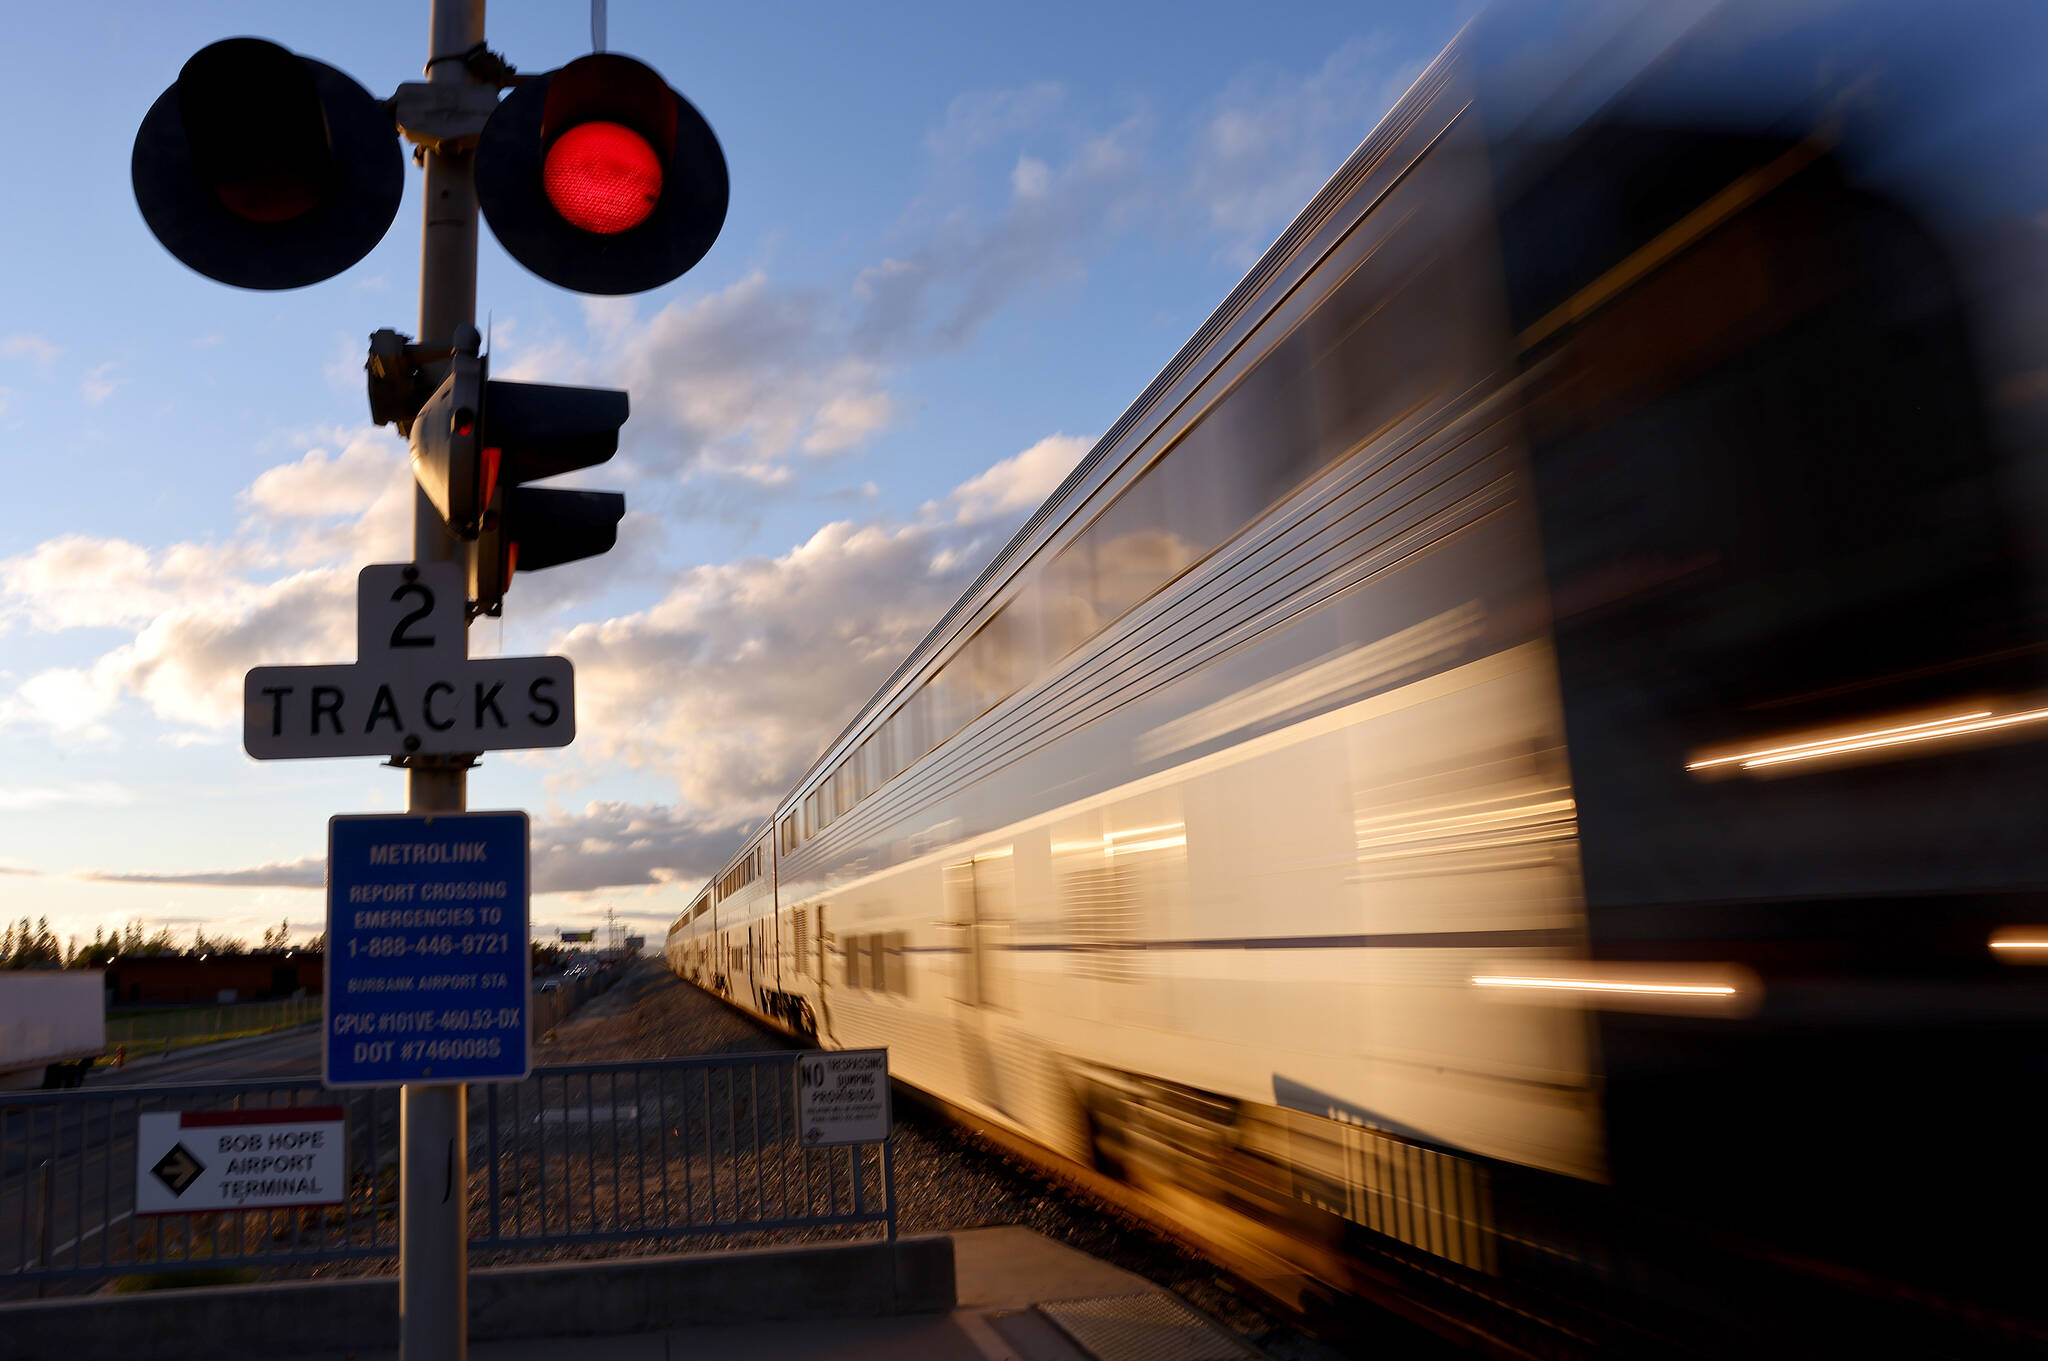 An Amtrak train arrives at a station stop on Dec. 9, 2021, in Burbank, Calif. Passenger rail advocates want to revive the Amtrak line between Mobile, Ala., and New Orleans that was shut down after Hurricane Katrina in 2005. Mario Tama | Getty Images | TNS